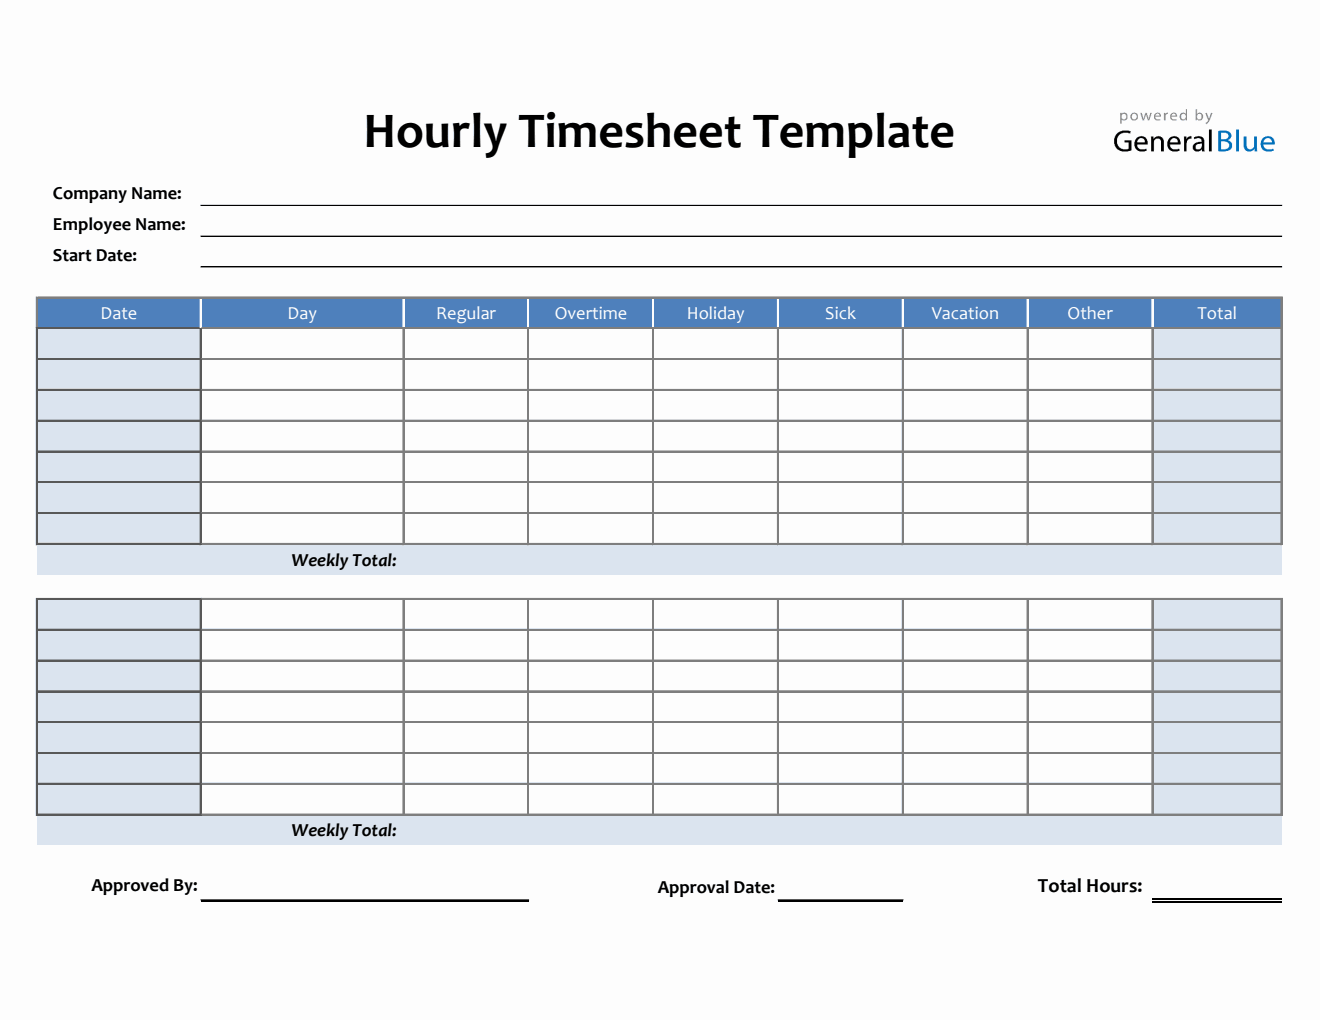 Hourly Timesheet Template in Excel (Blue)